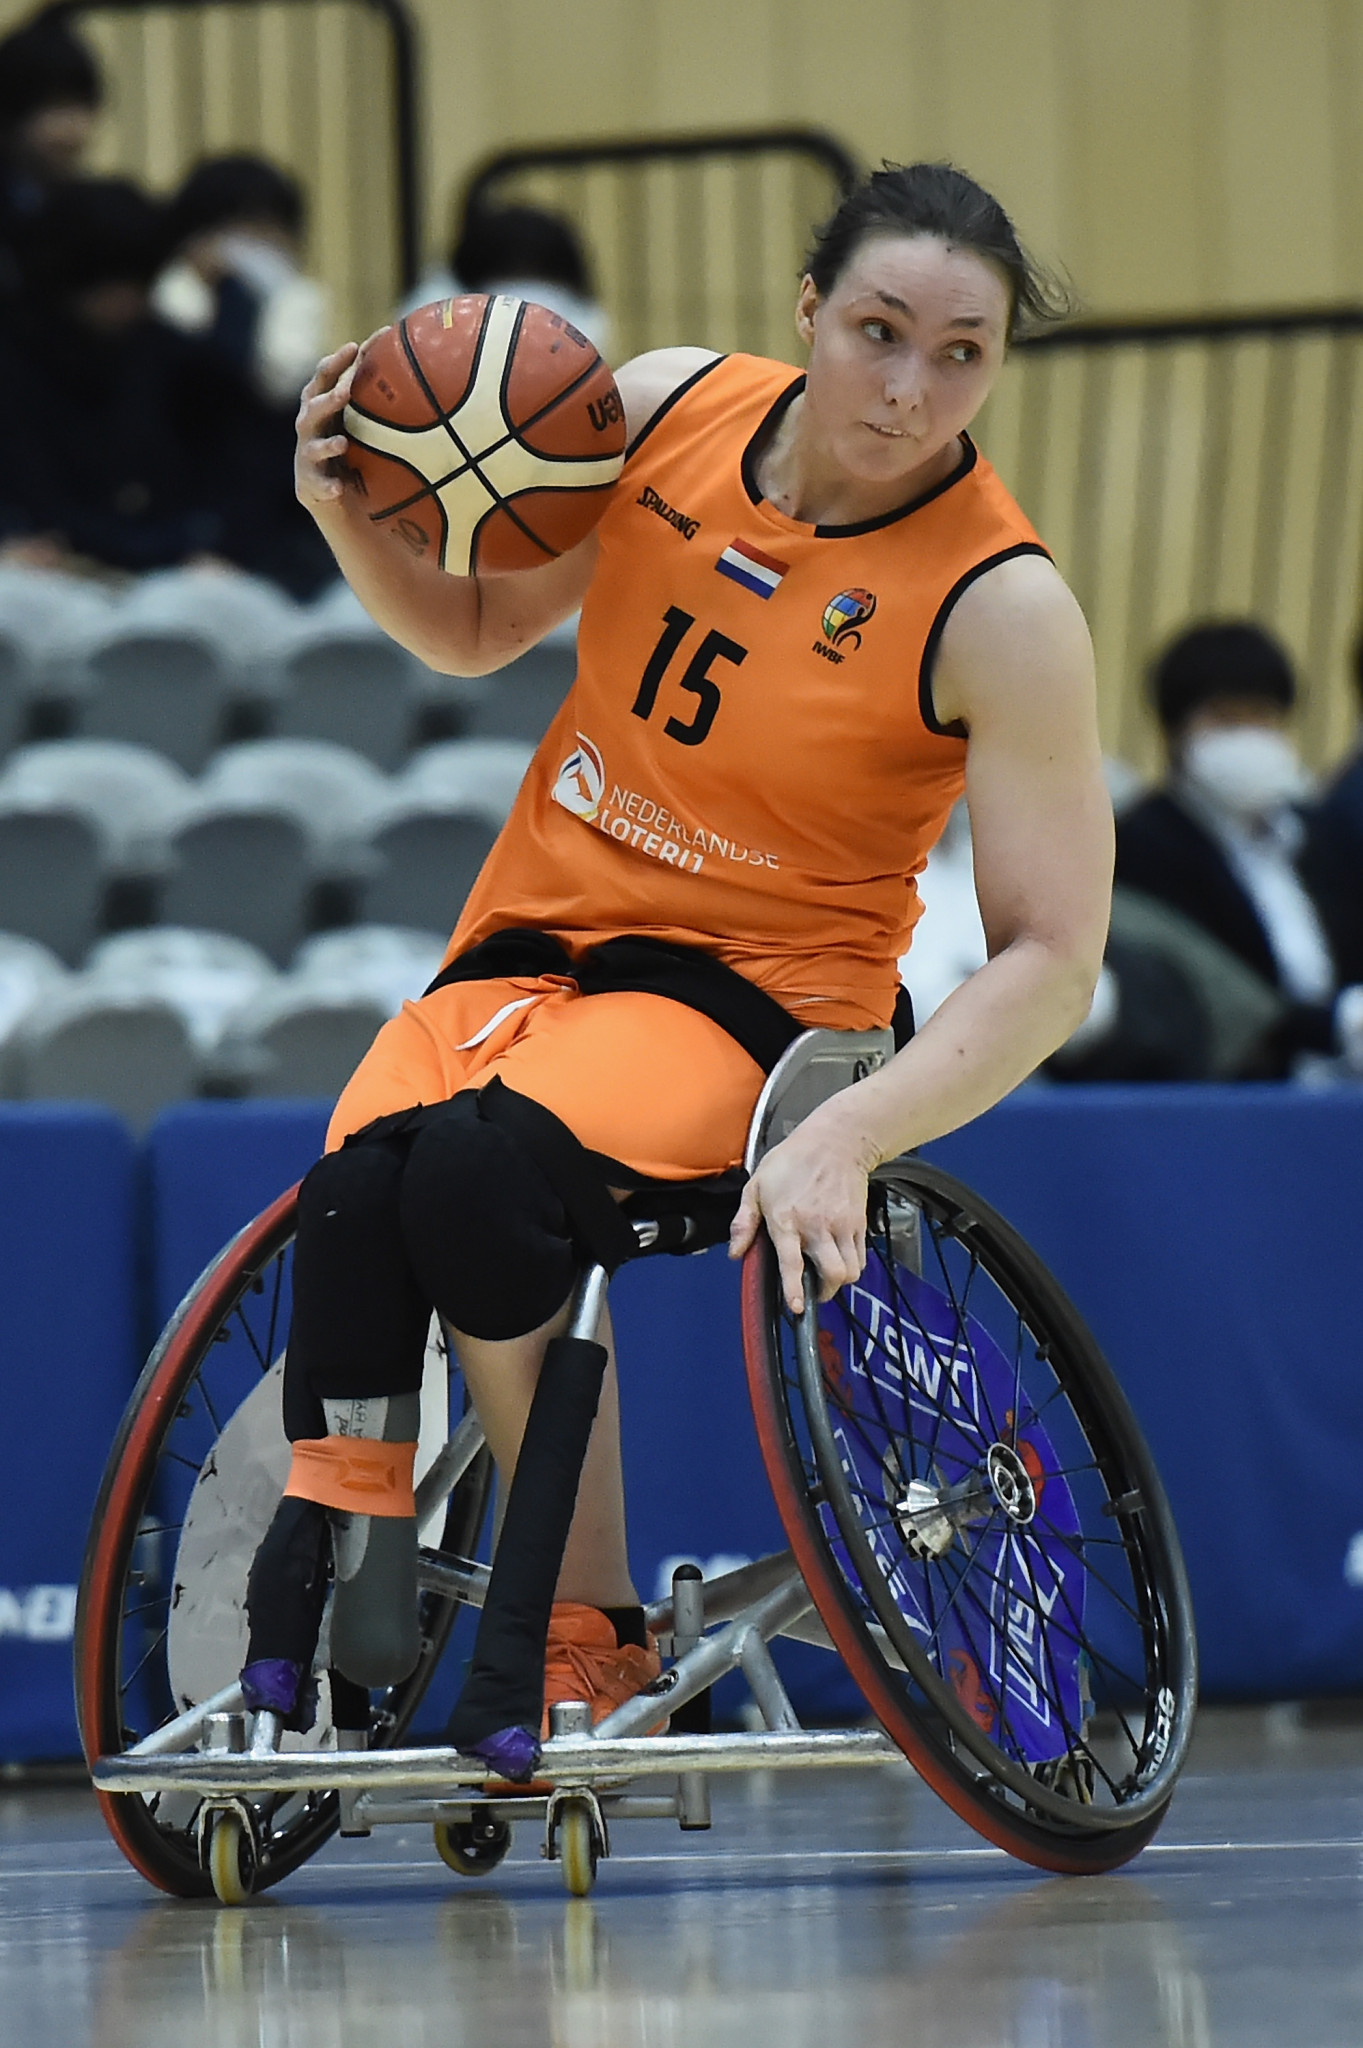 The Netherlands are reportedly set to host the 2023 European Parasports Championships ©Getty Images